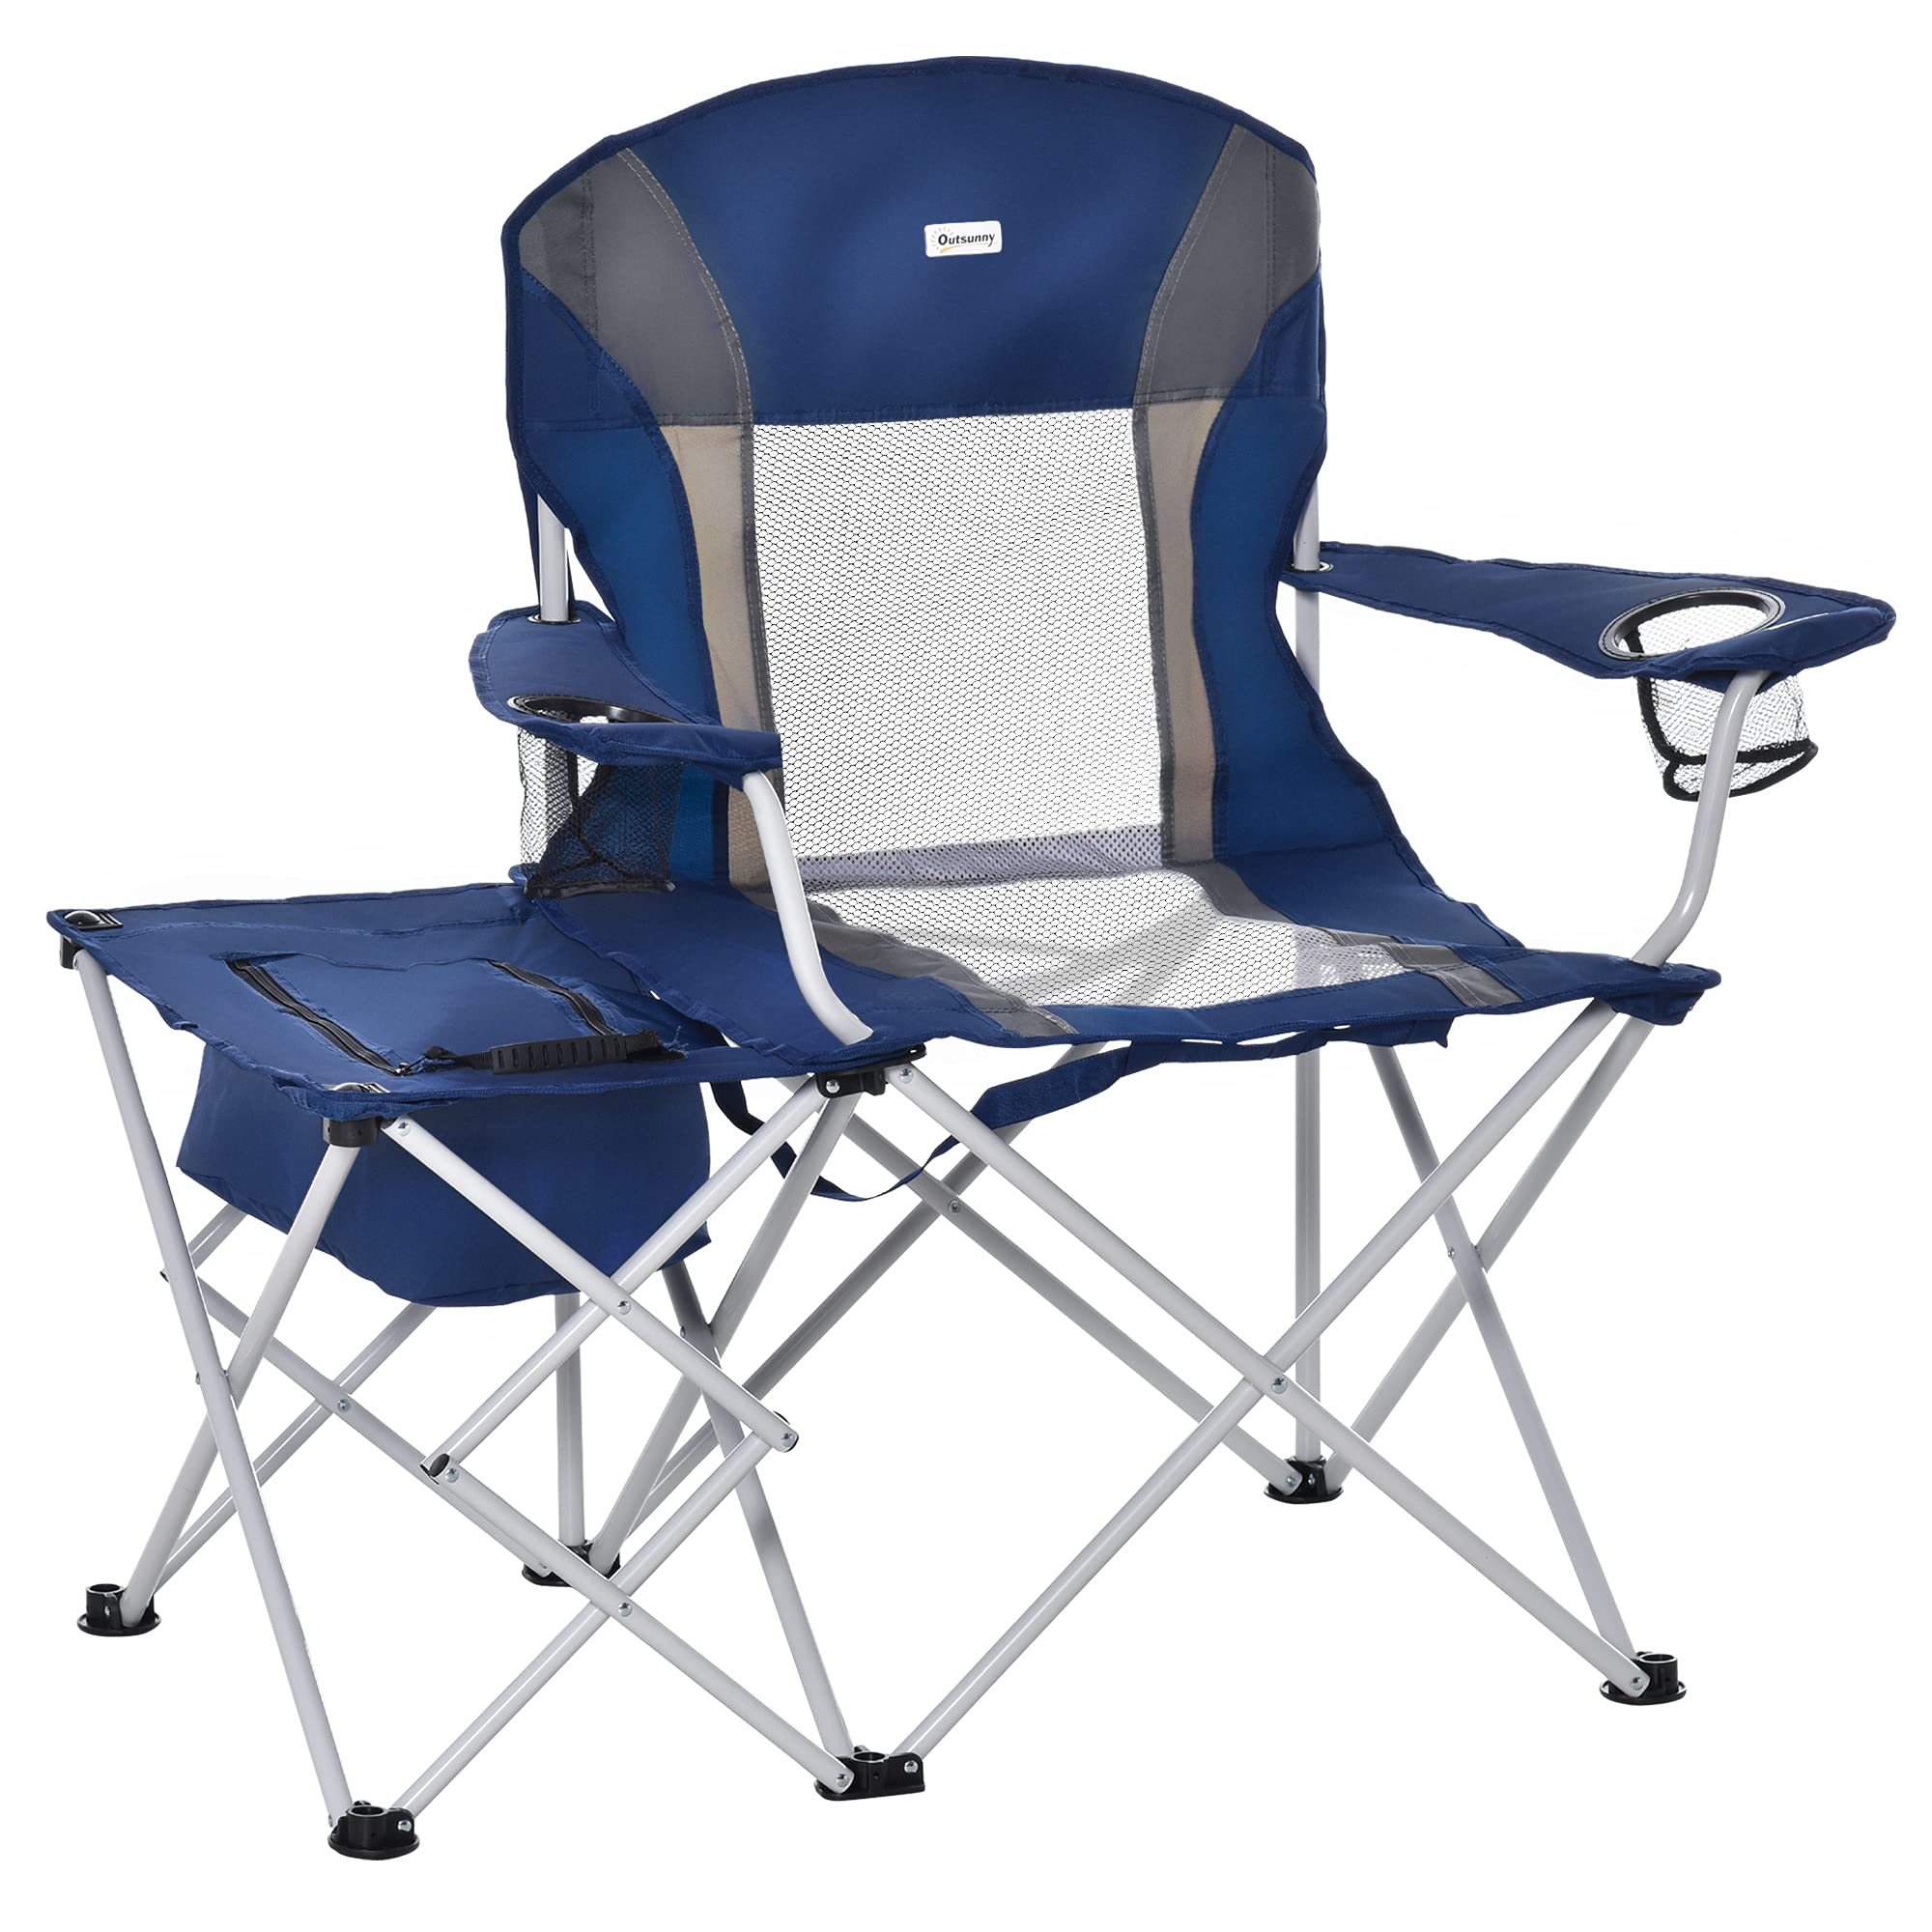 Outsunny Folding Camping Chair with Portable Insulation Table Bag Two Cup Holders for Beach Ice Fishing and Picnic Navy Bl